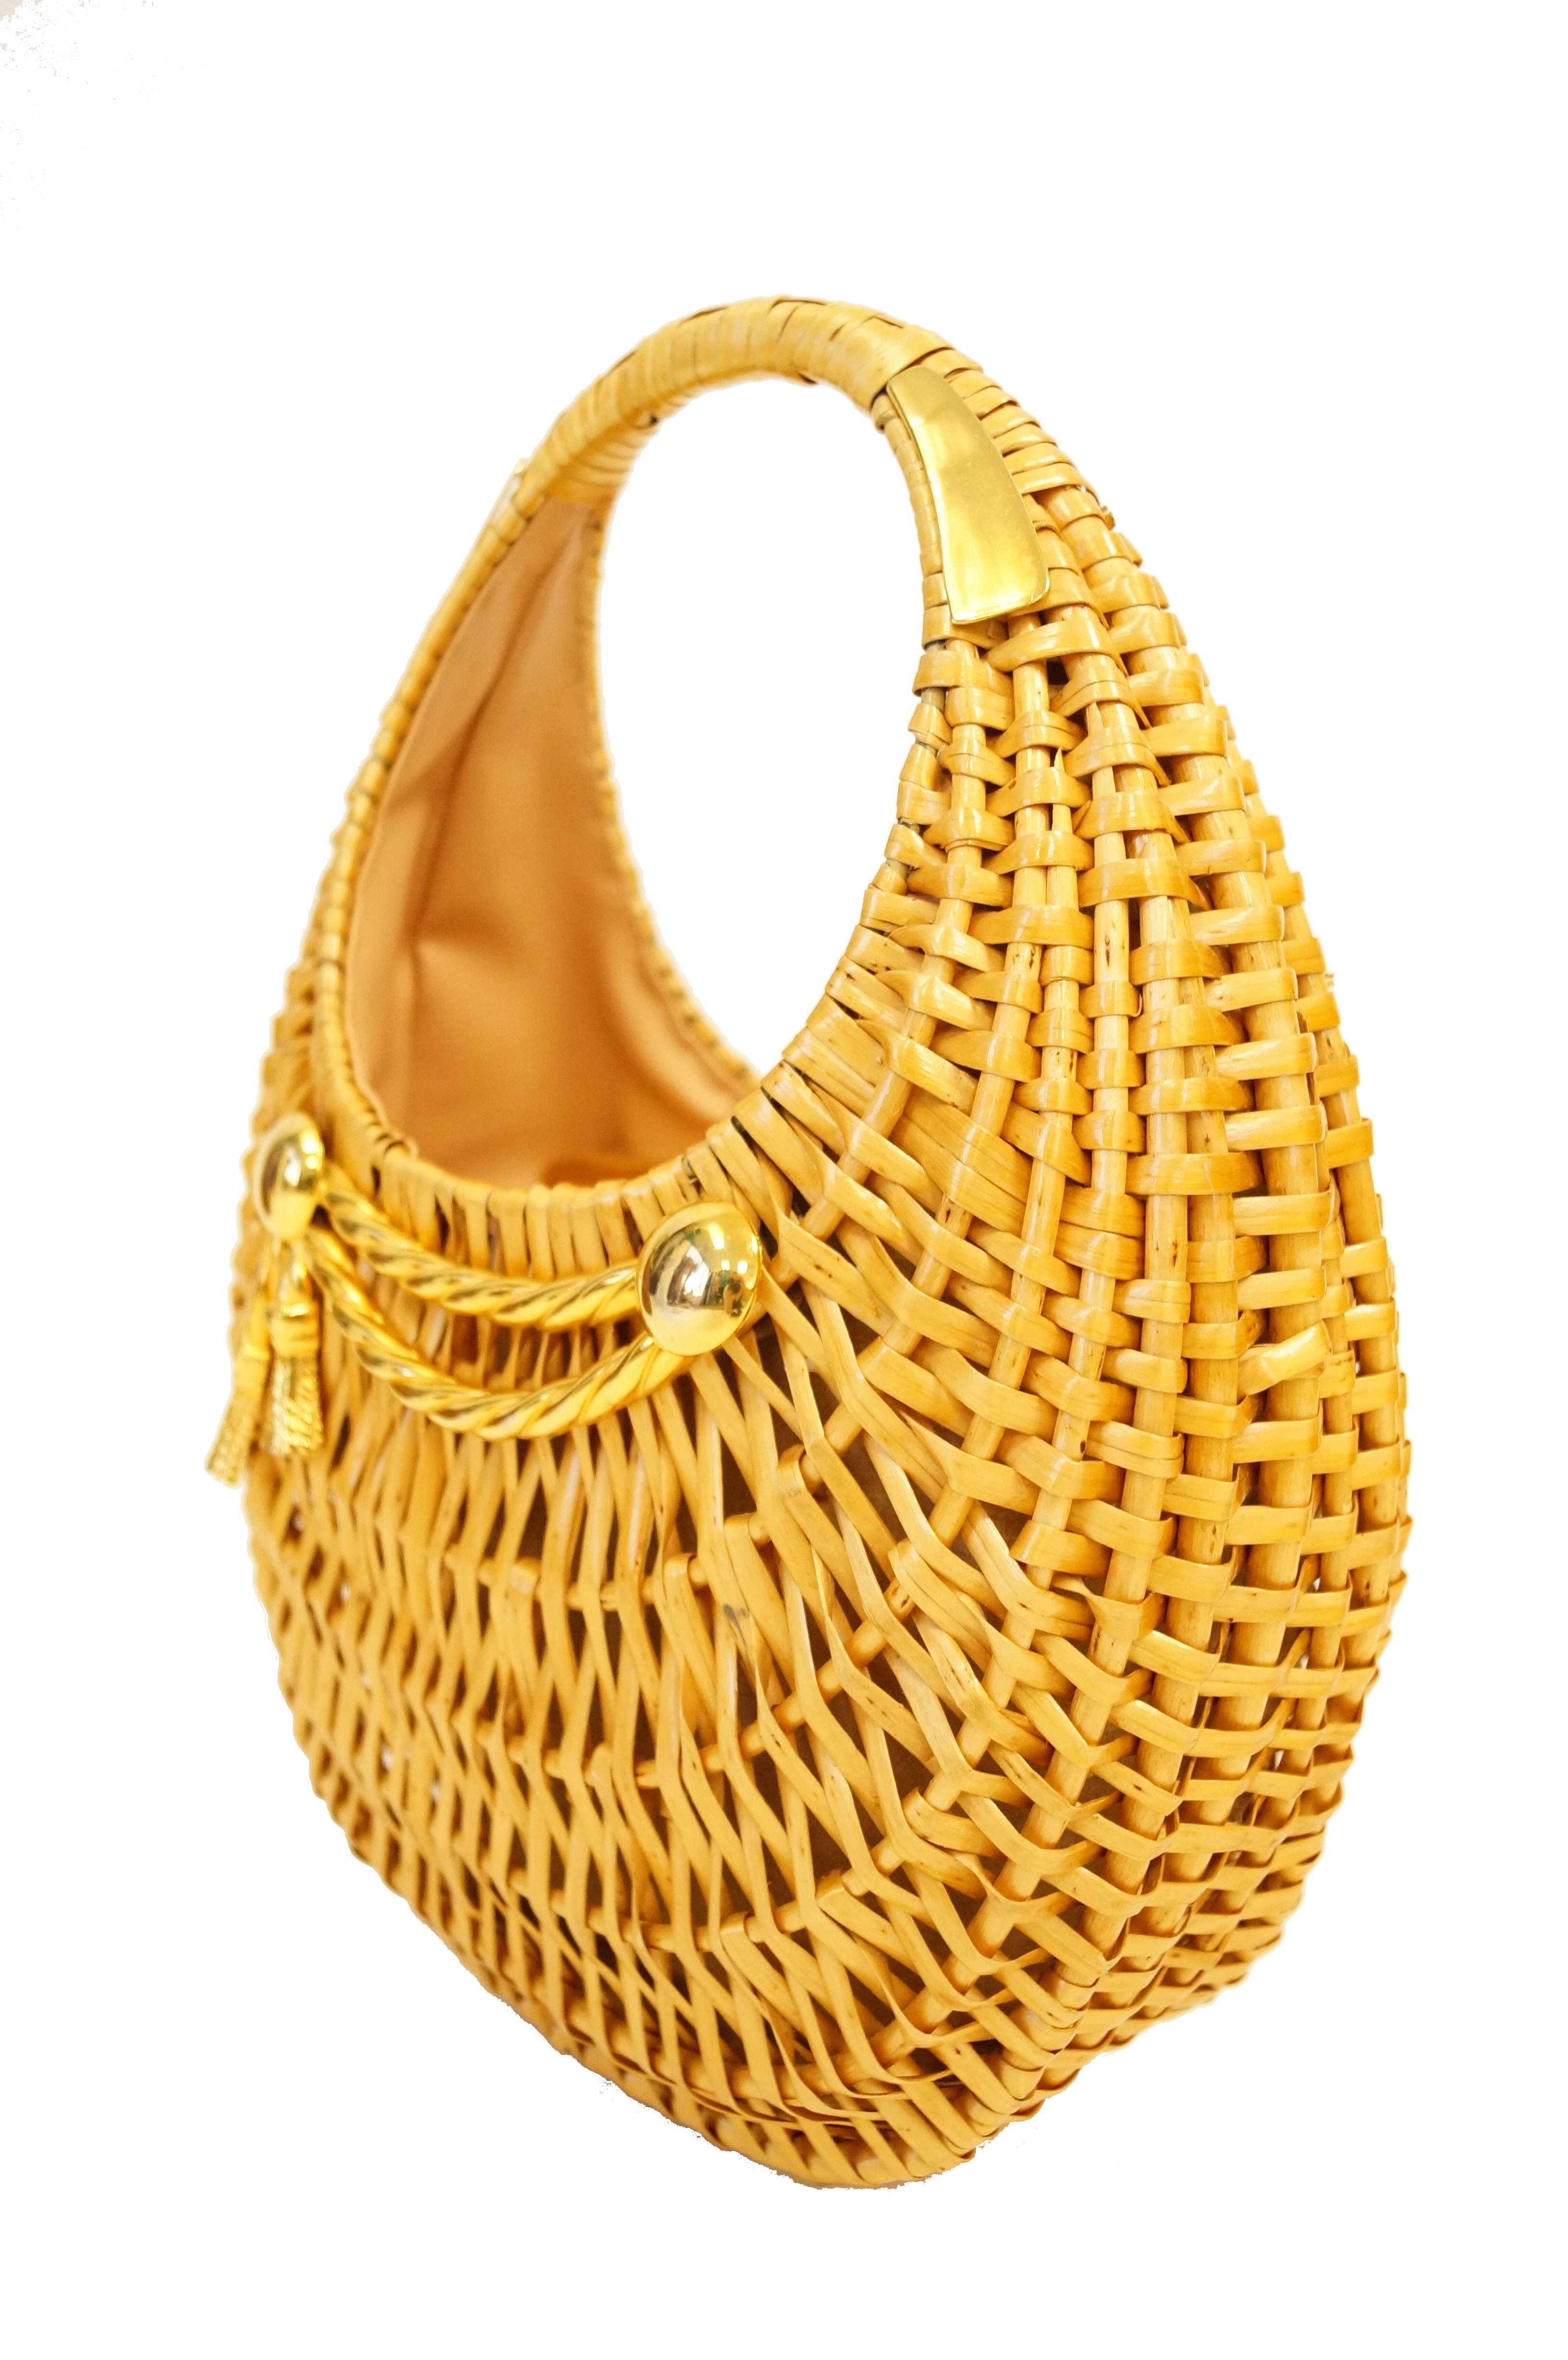 Beautifully woven flat reed handbag in a crescent shape by Koret! The handbag is oval, features a gold tone tassel motif, and a large round handle accented by gold clips. The interior is lined in tan faux leather, and features a snap pocket. Perfect